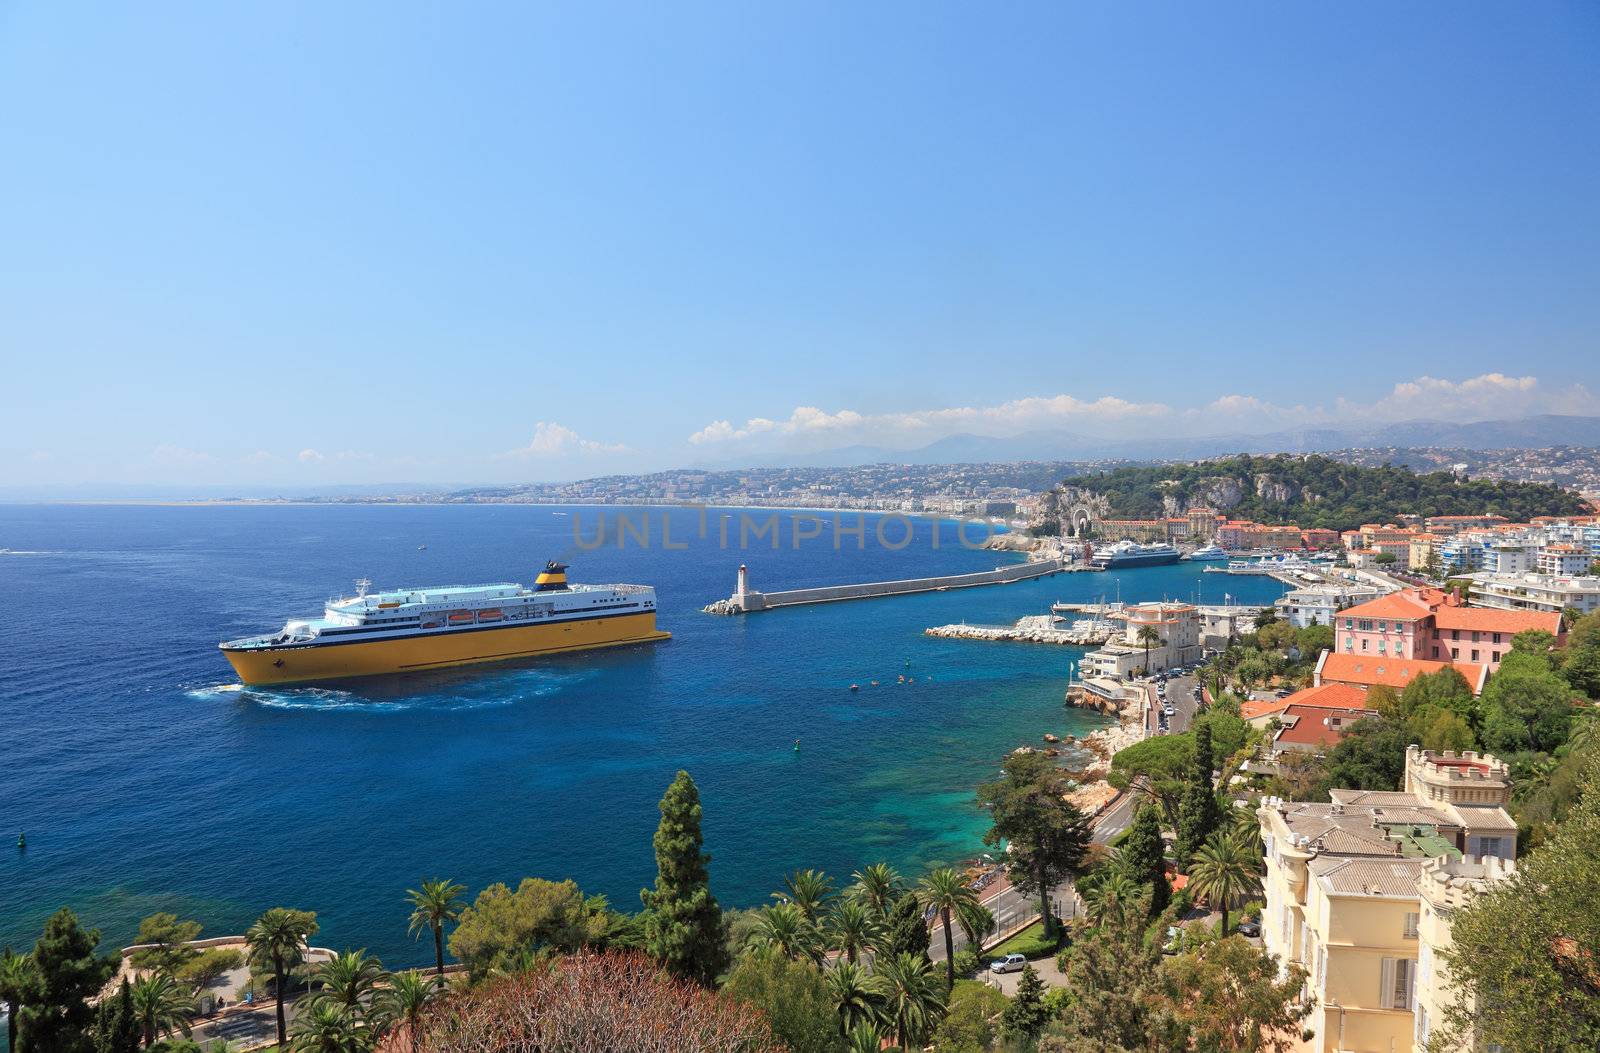 Summer view of the city of Nice and the harbor with crusie ship.